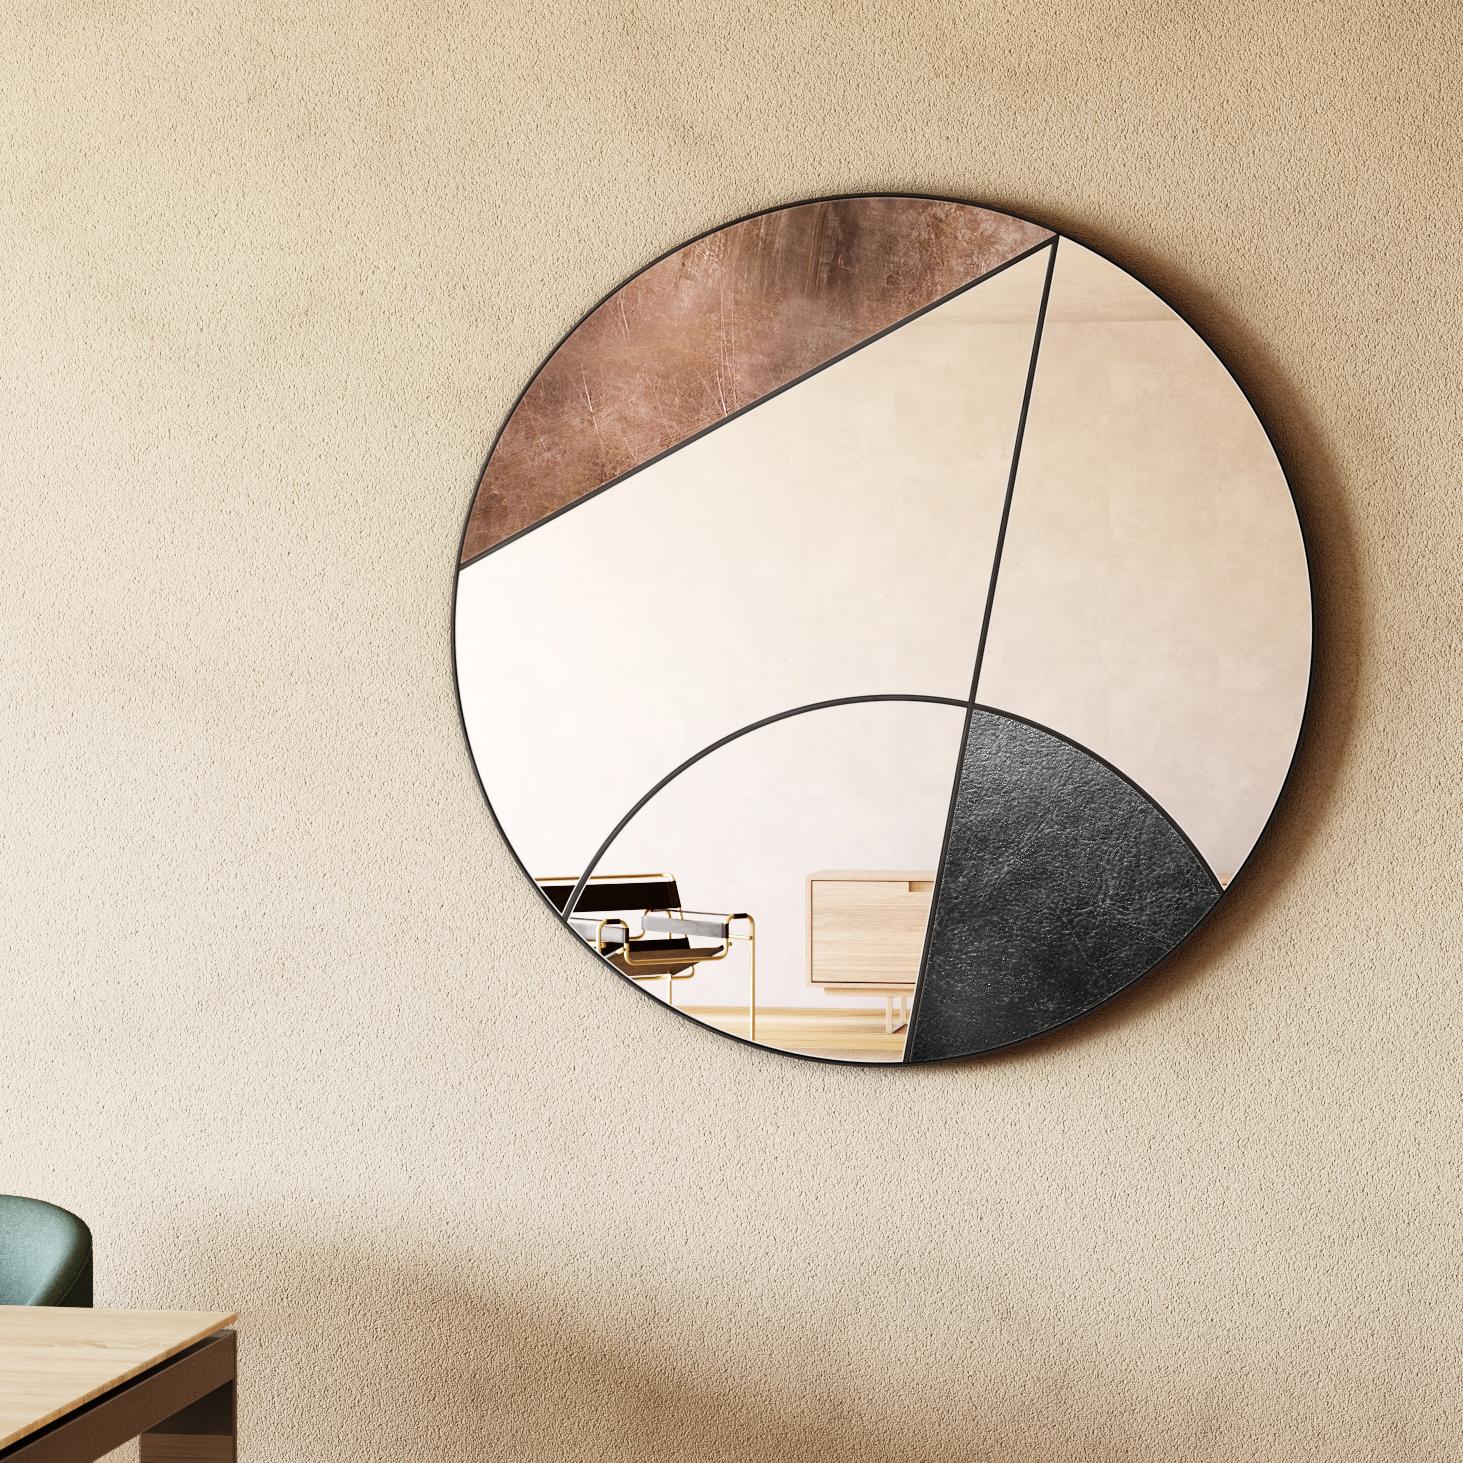 Eclipsis III

The fascinating performance of the moon casting its shadow onto Earth inspired this mirror by Atlasproject. The typical geometries of the design and the refined materials guarantee a seductive and brilliant result, as a tribute to